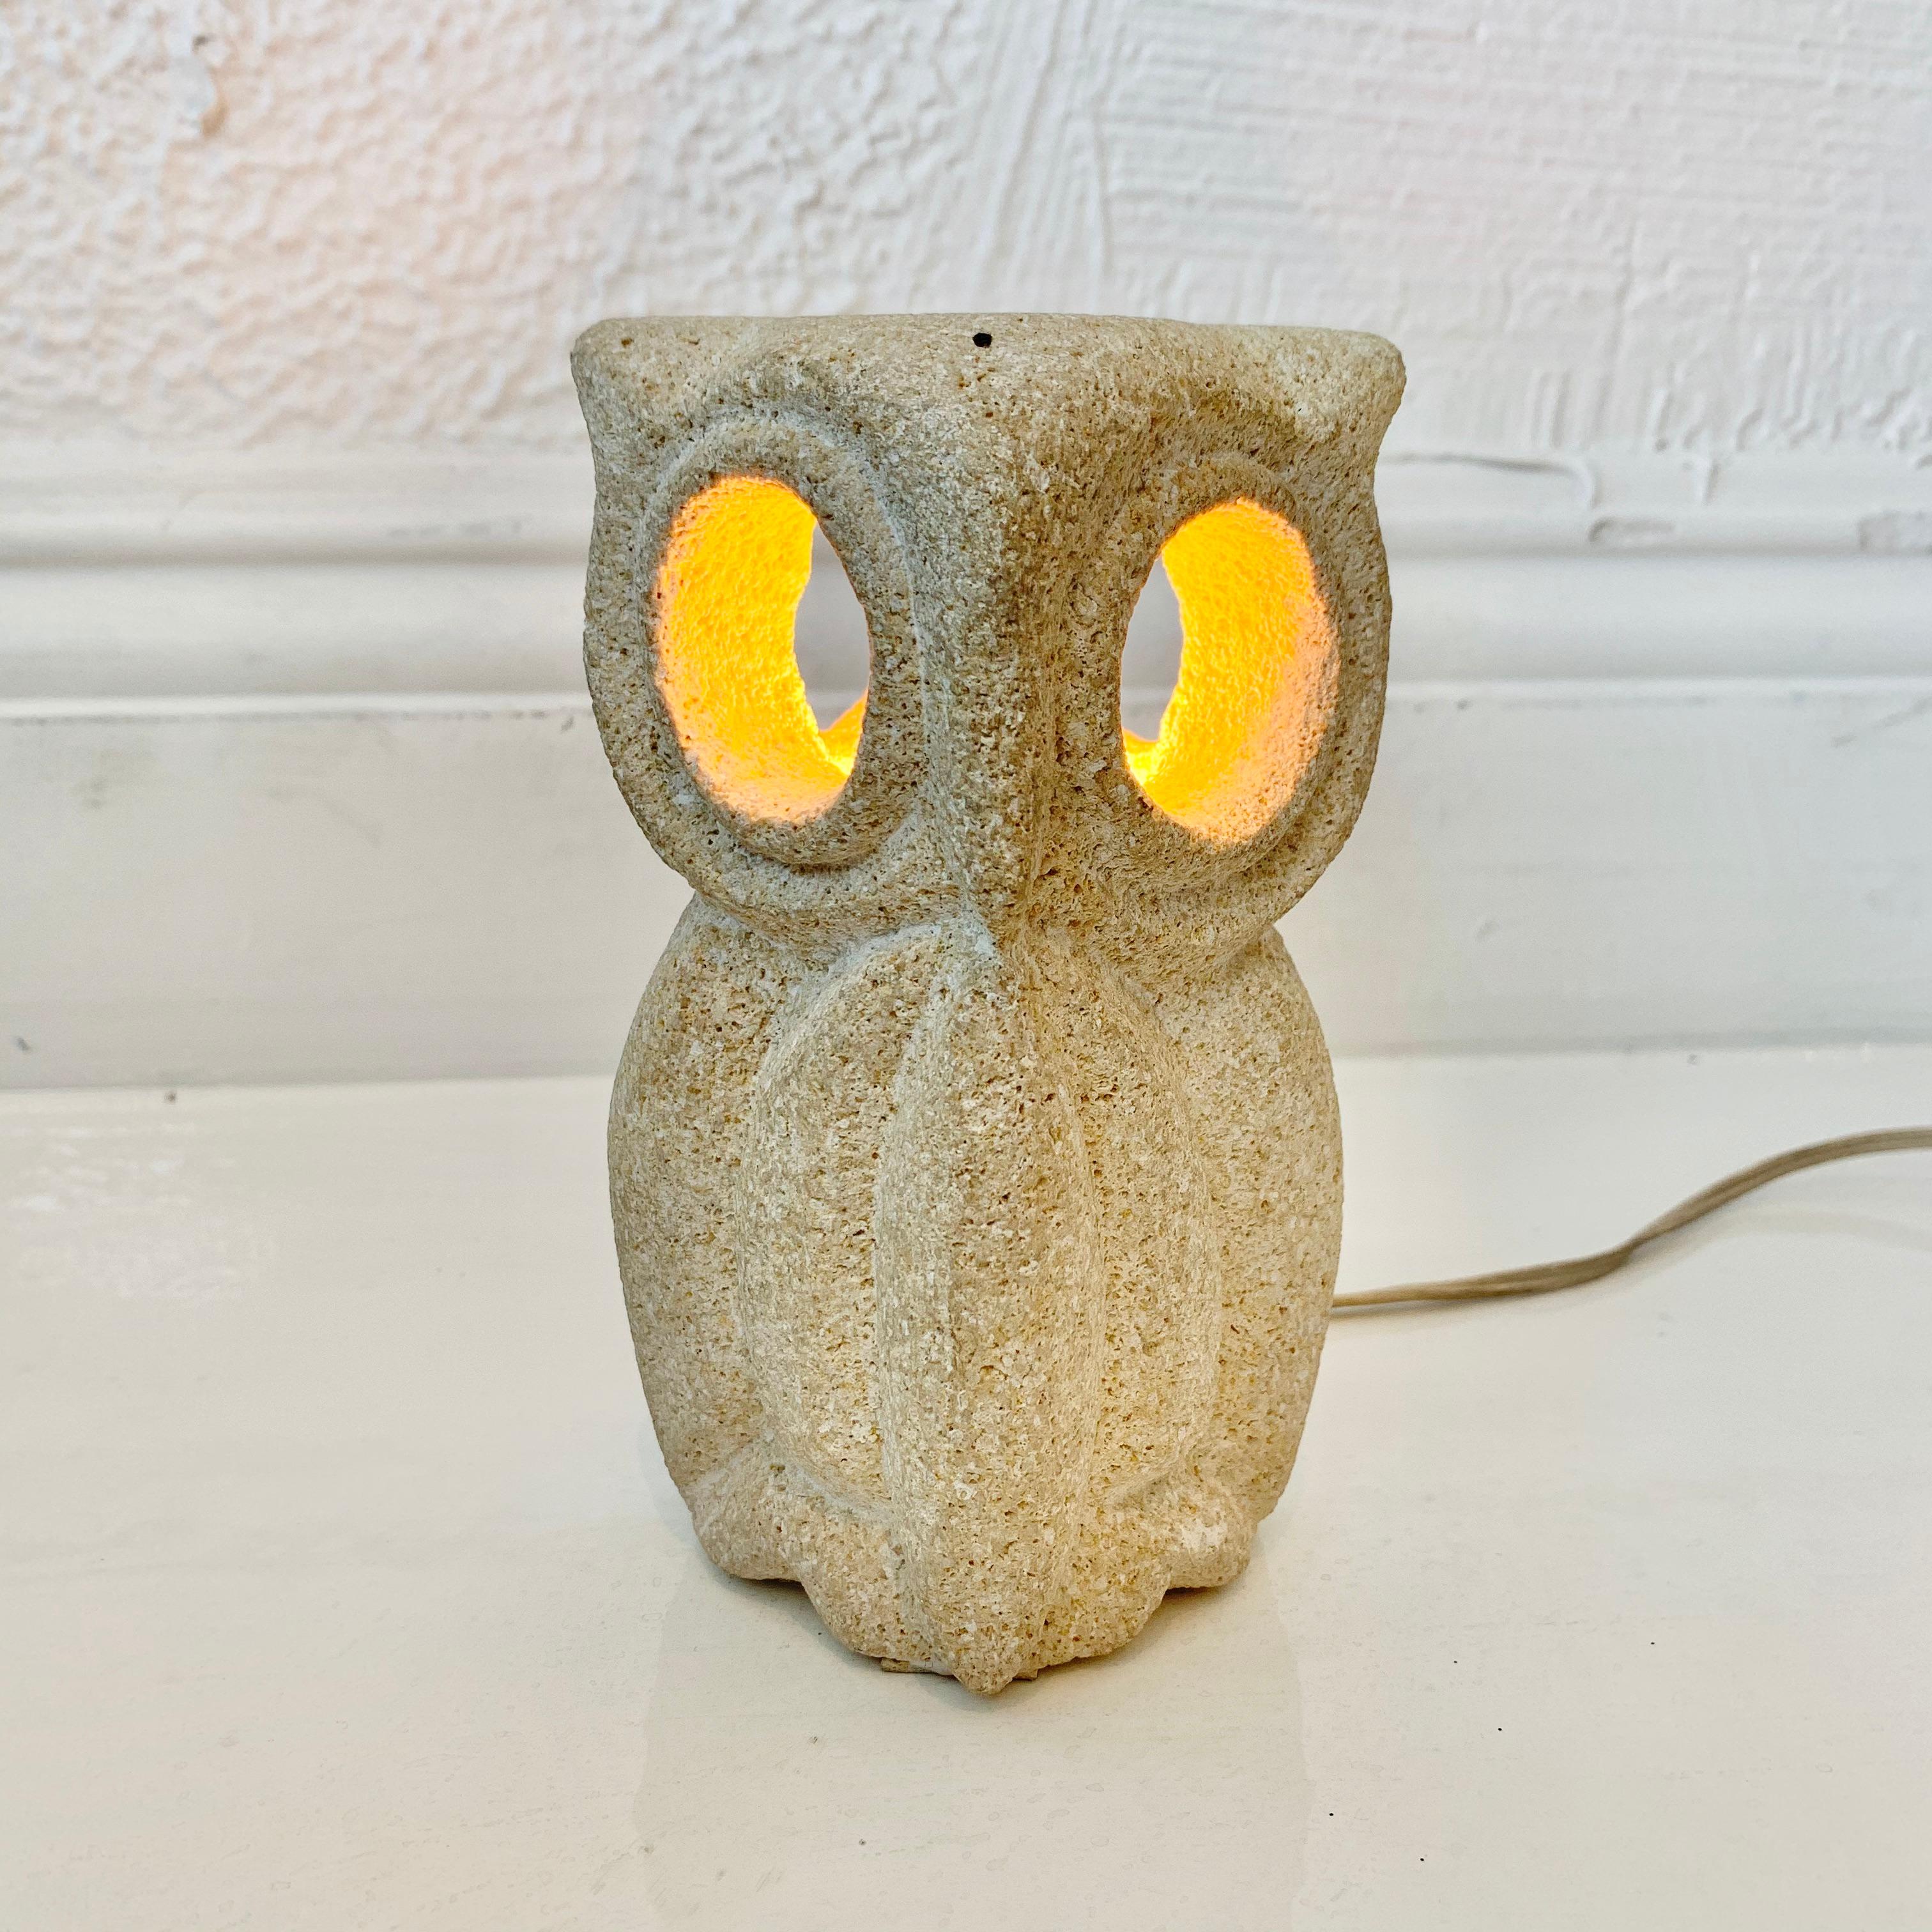 Cunning carved stone lamp of an owl made in France, circa 1970s. Created by French sculptor Albert Tormos. AT initials engraved on the back. Circular cut-outs that allows light through the owl's eyes. Looks great on and off. Hand switch on the cord.